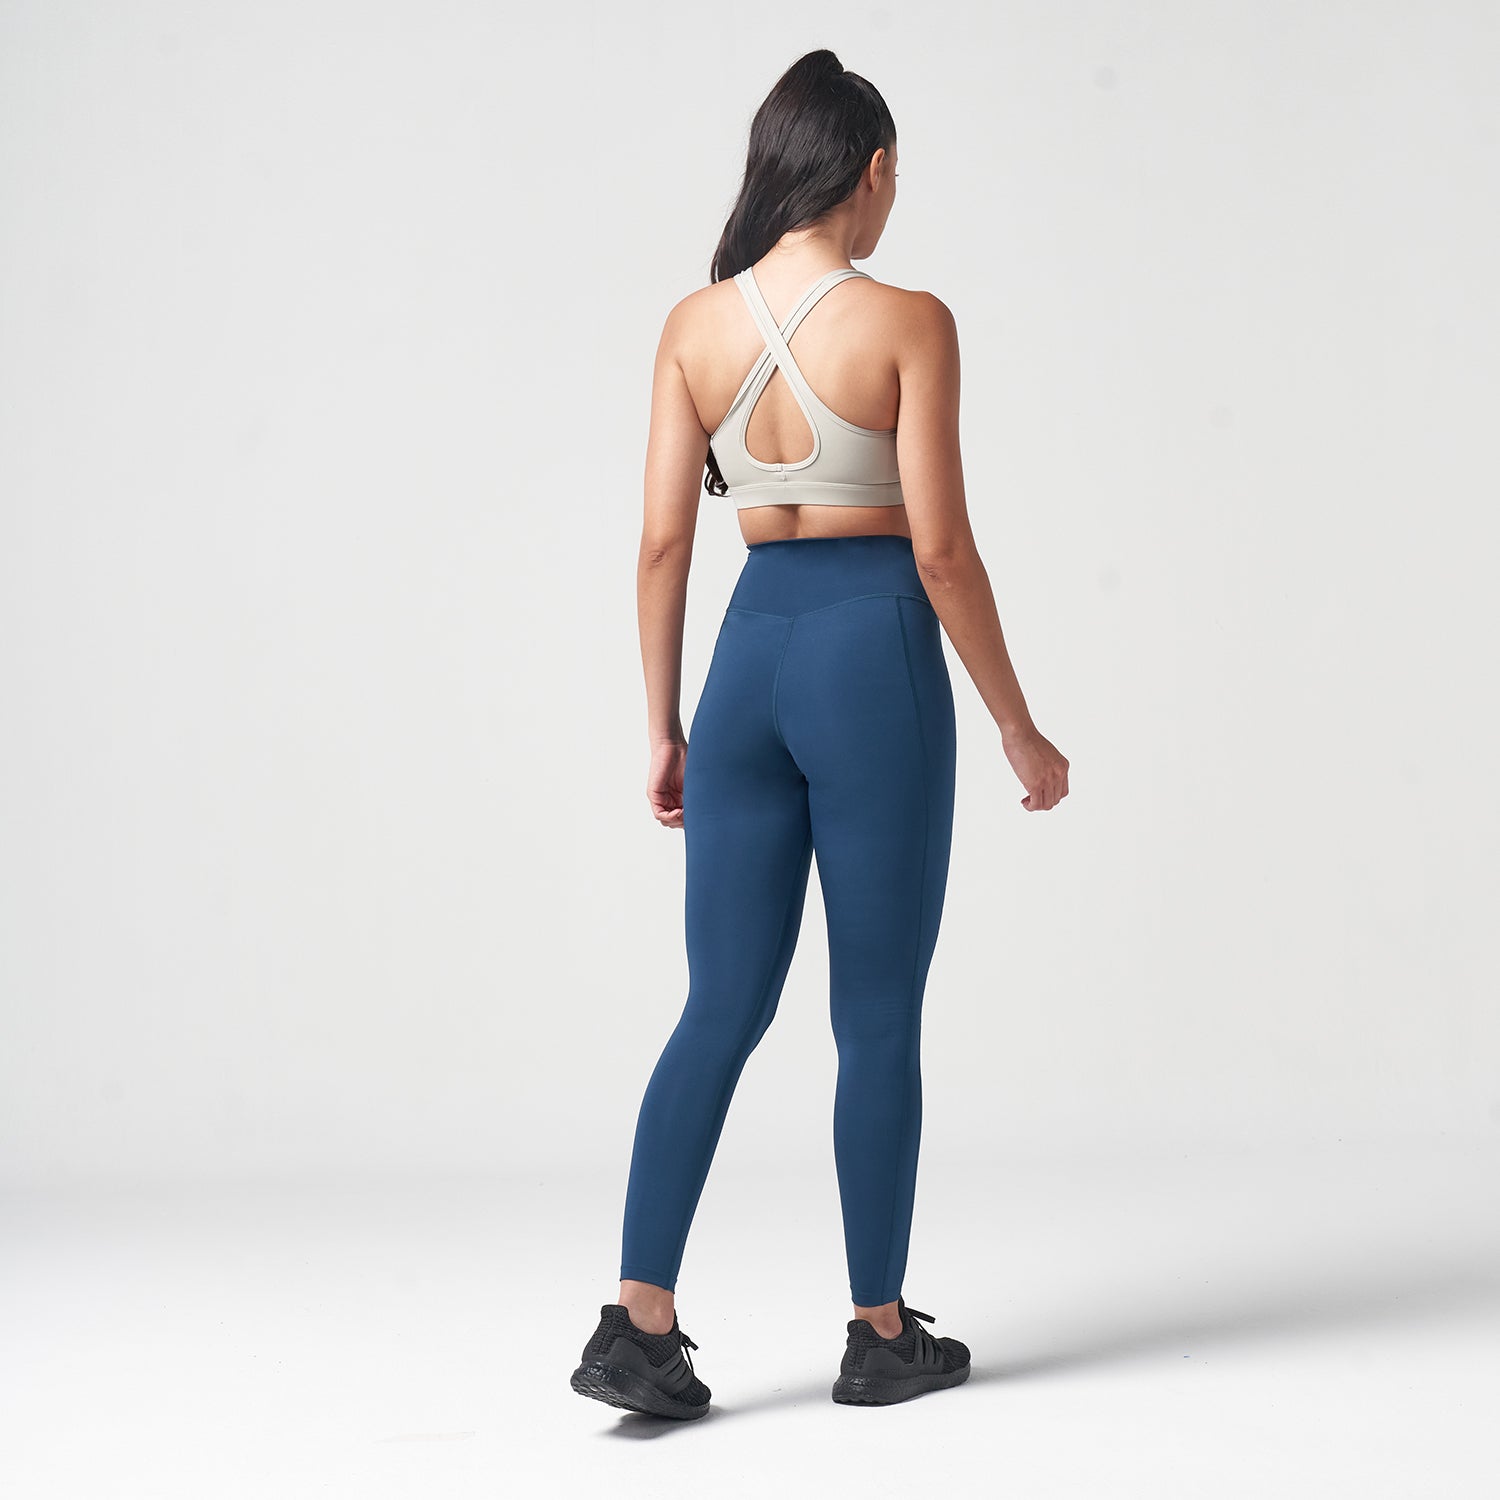 Gym Workout Clothes - Perfect Fit - B&M Online Store